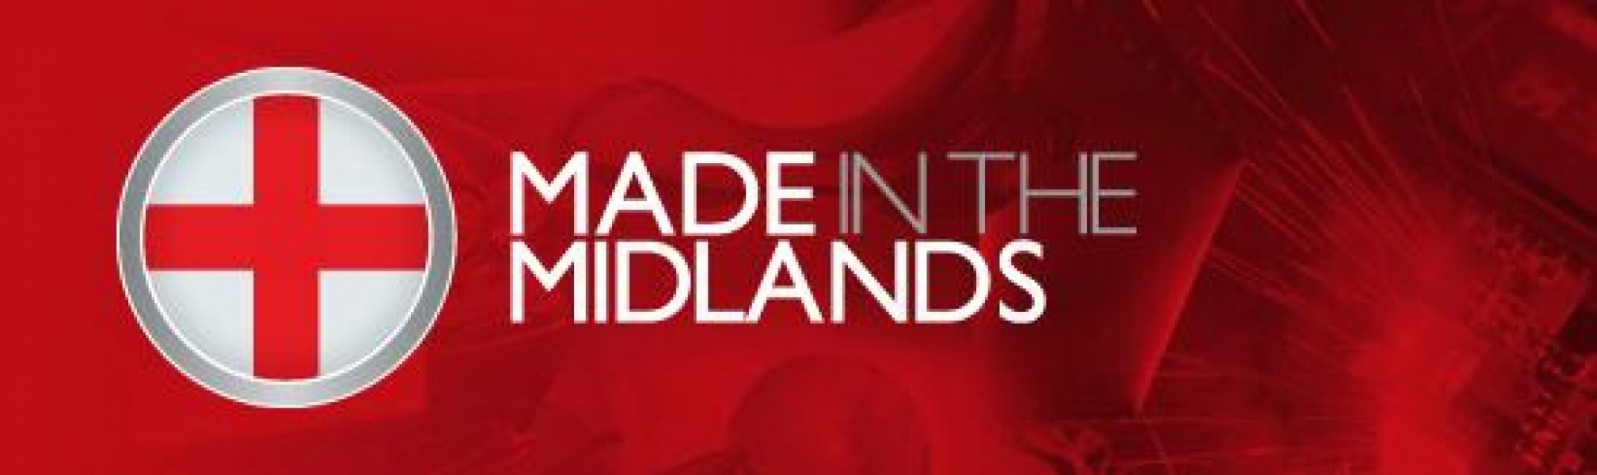 Register now for the Made in the Midlands Expo 201...